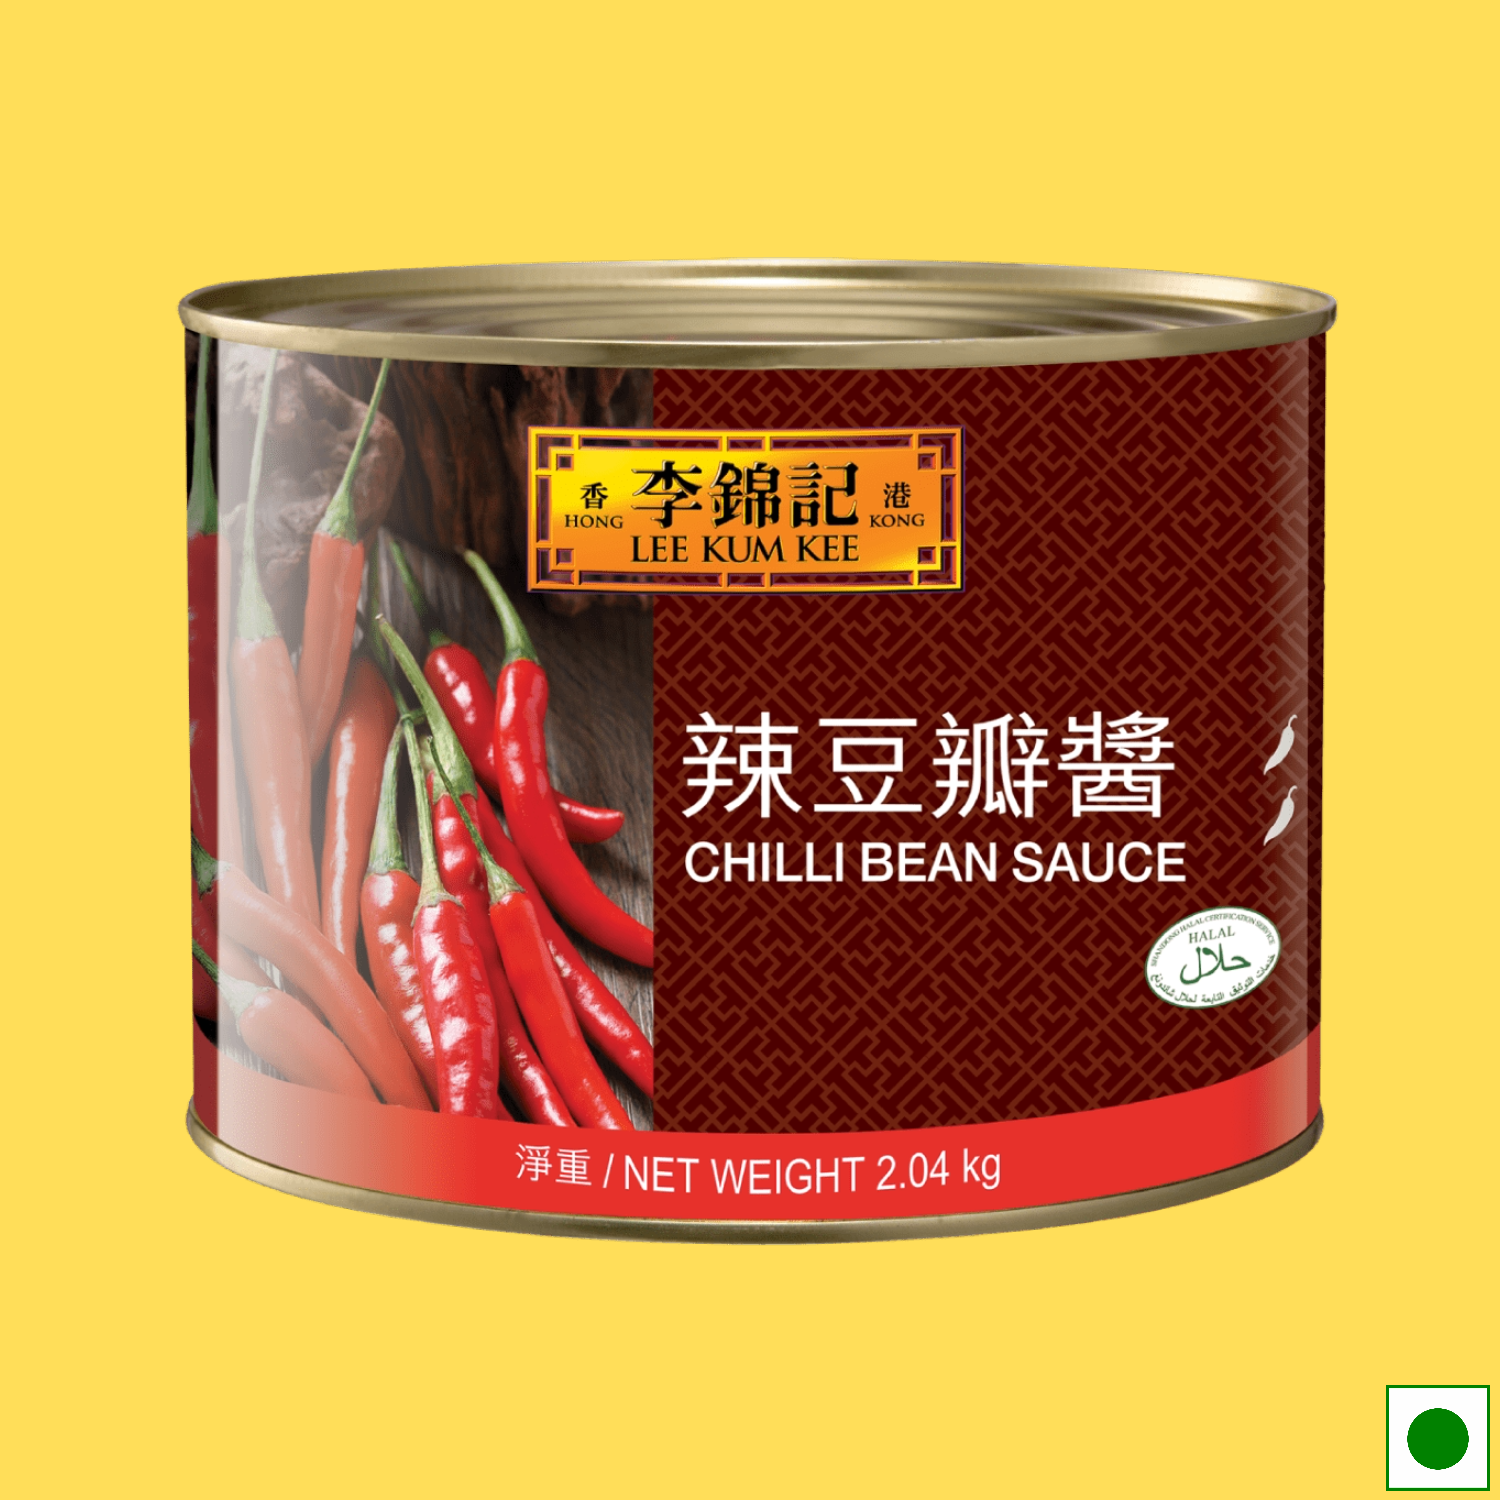 Lee Kum Kee Chilli Bean Sauce Tin, 2.04kg (Imported)